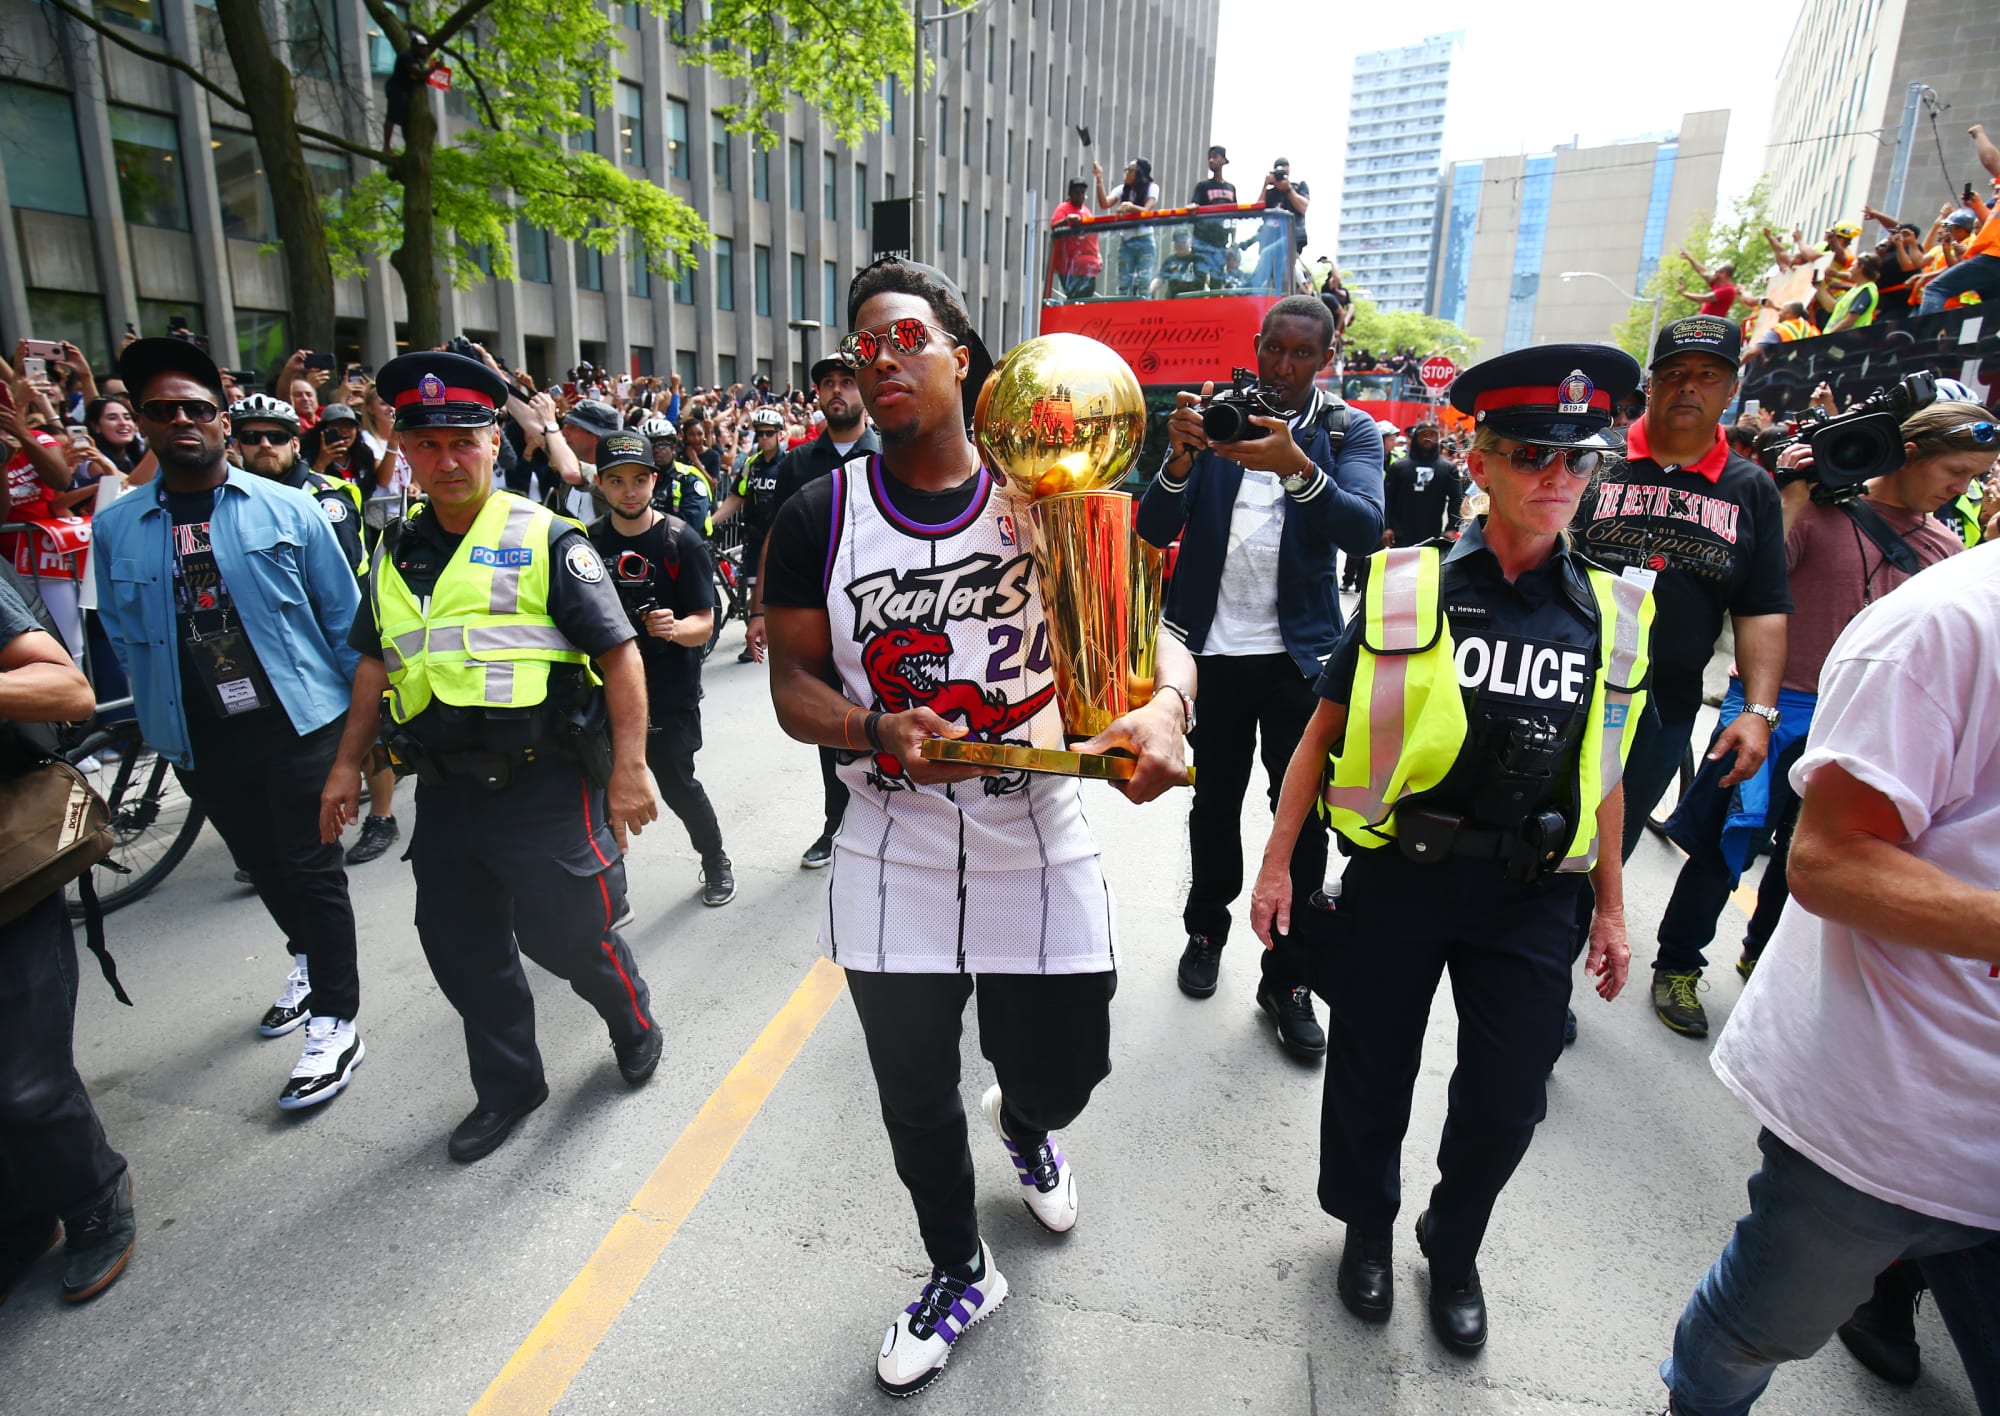 3 title winners from the last decade the 2019 Toronto Raptors are better than